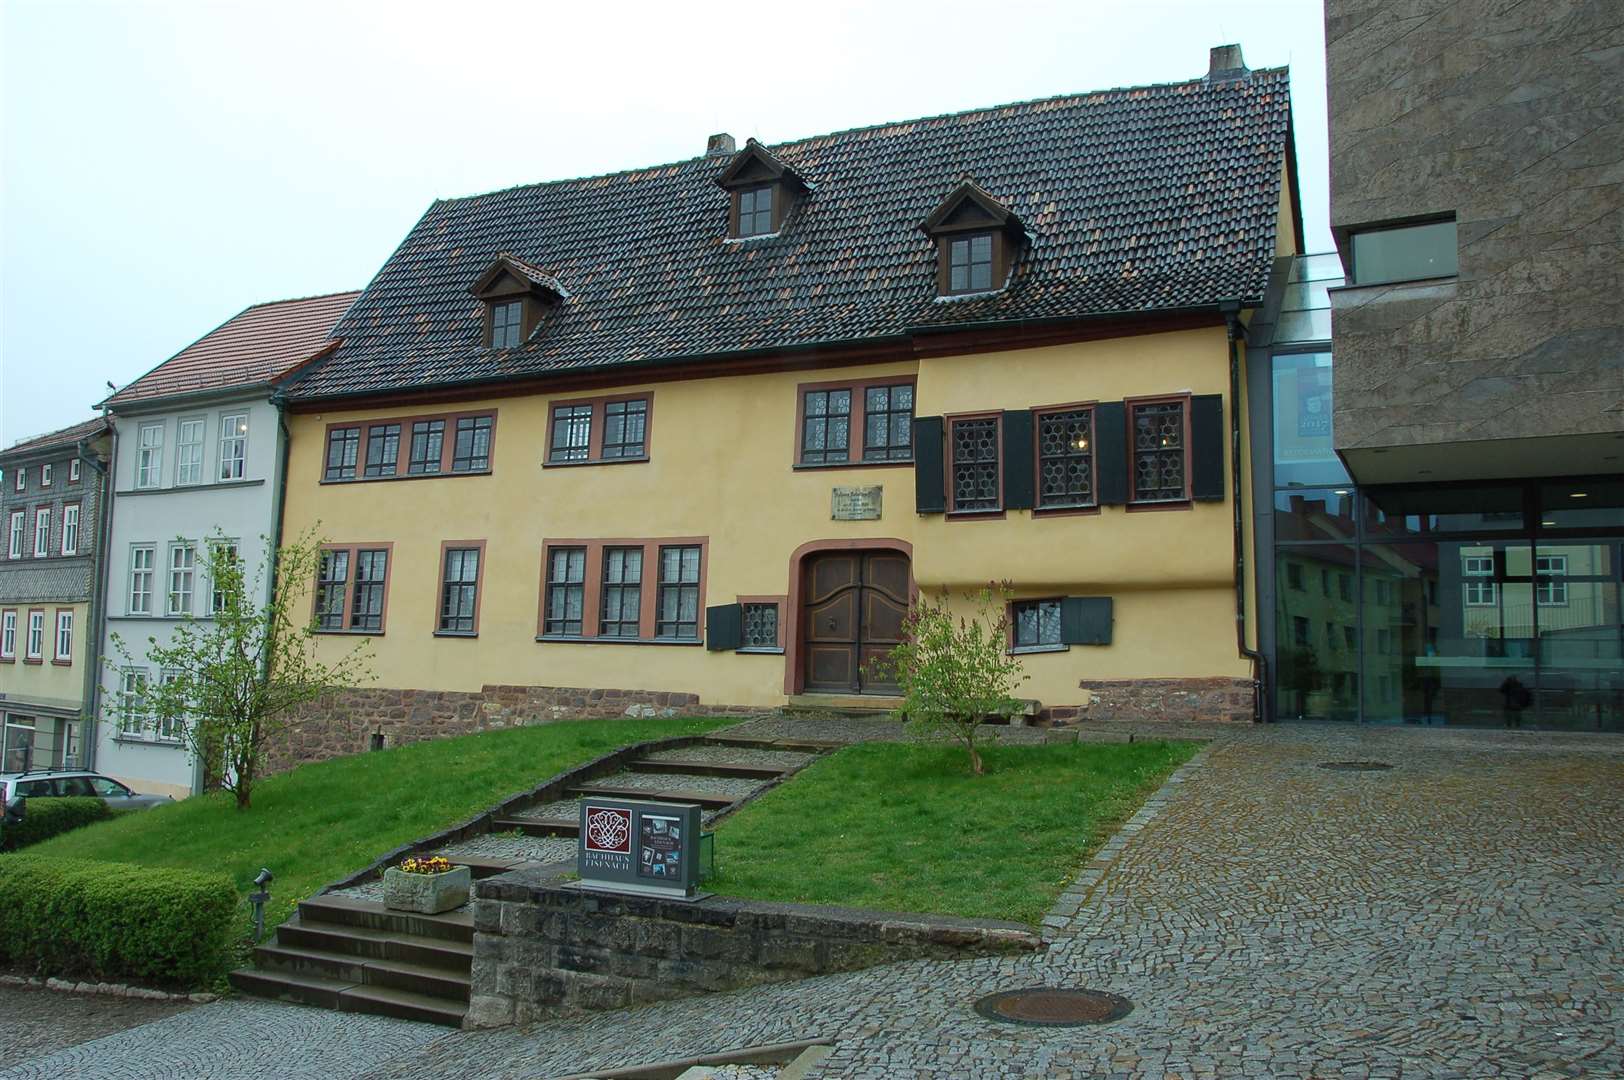 JS Bach’s house in the centre of Eisenach.